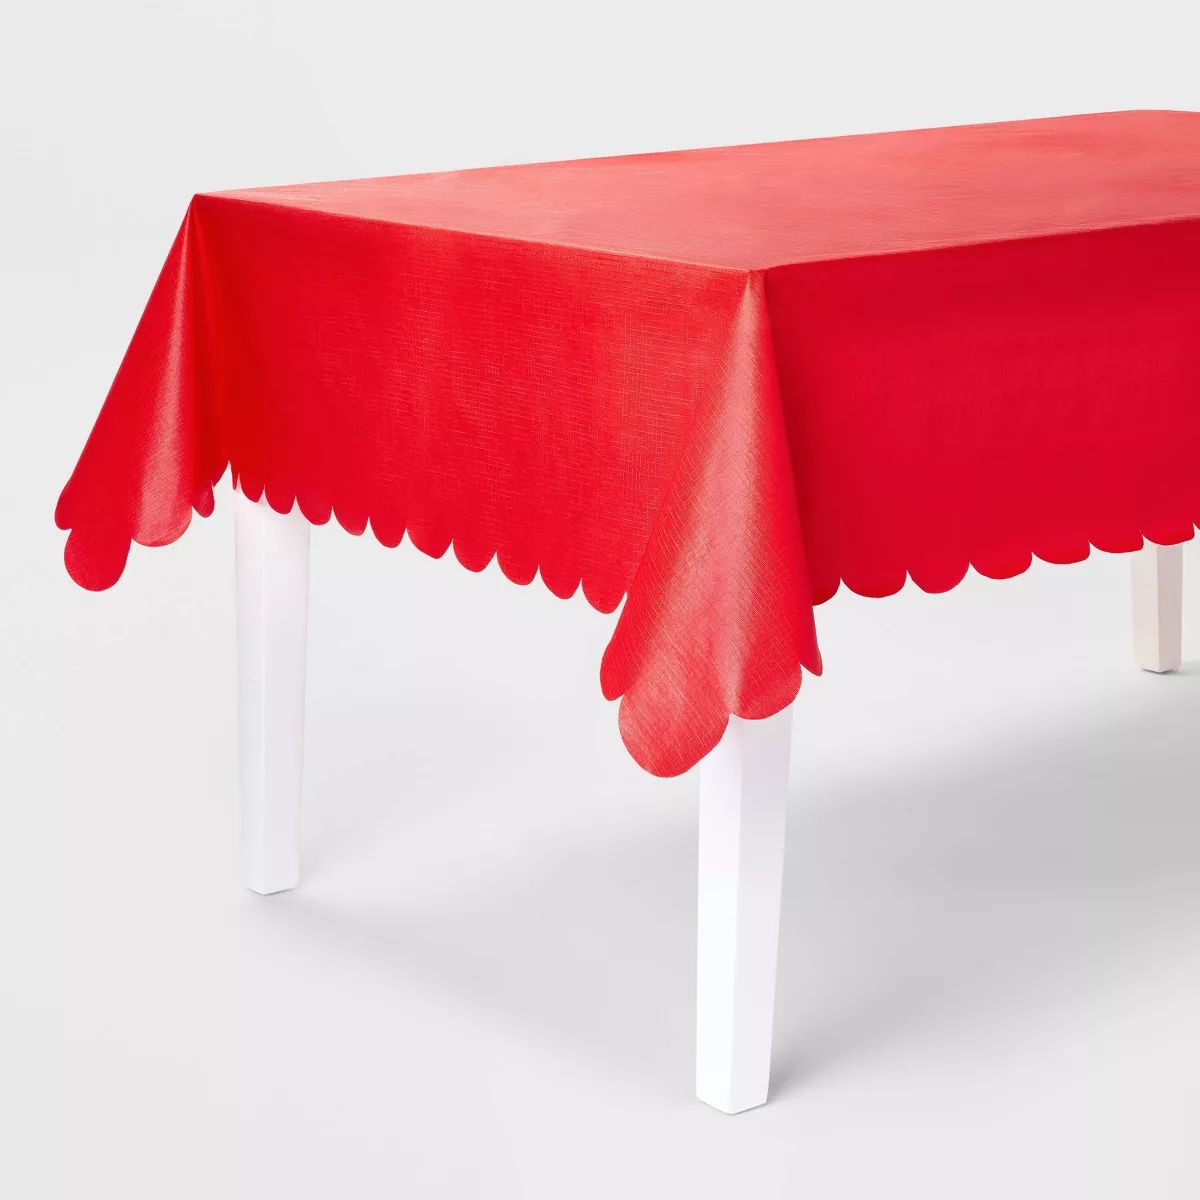 68" x 84" PEVA Tablecloth Red Scalloped - Spritz™ | Target